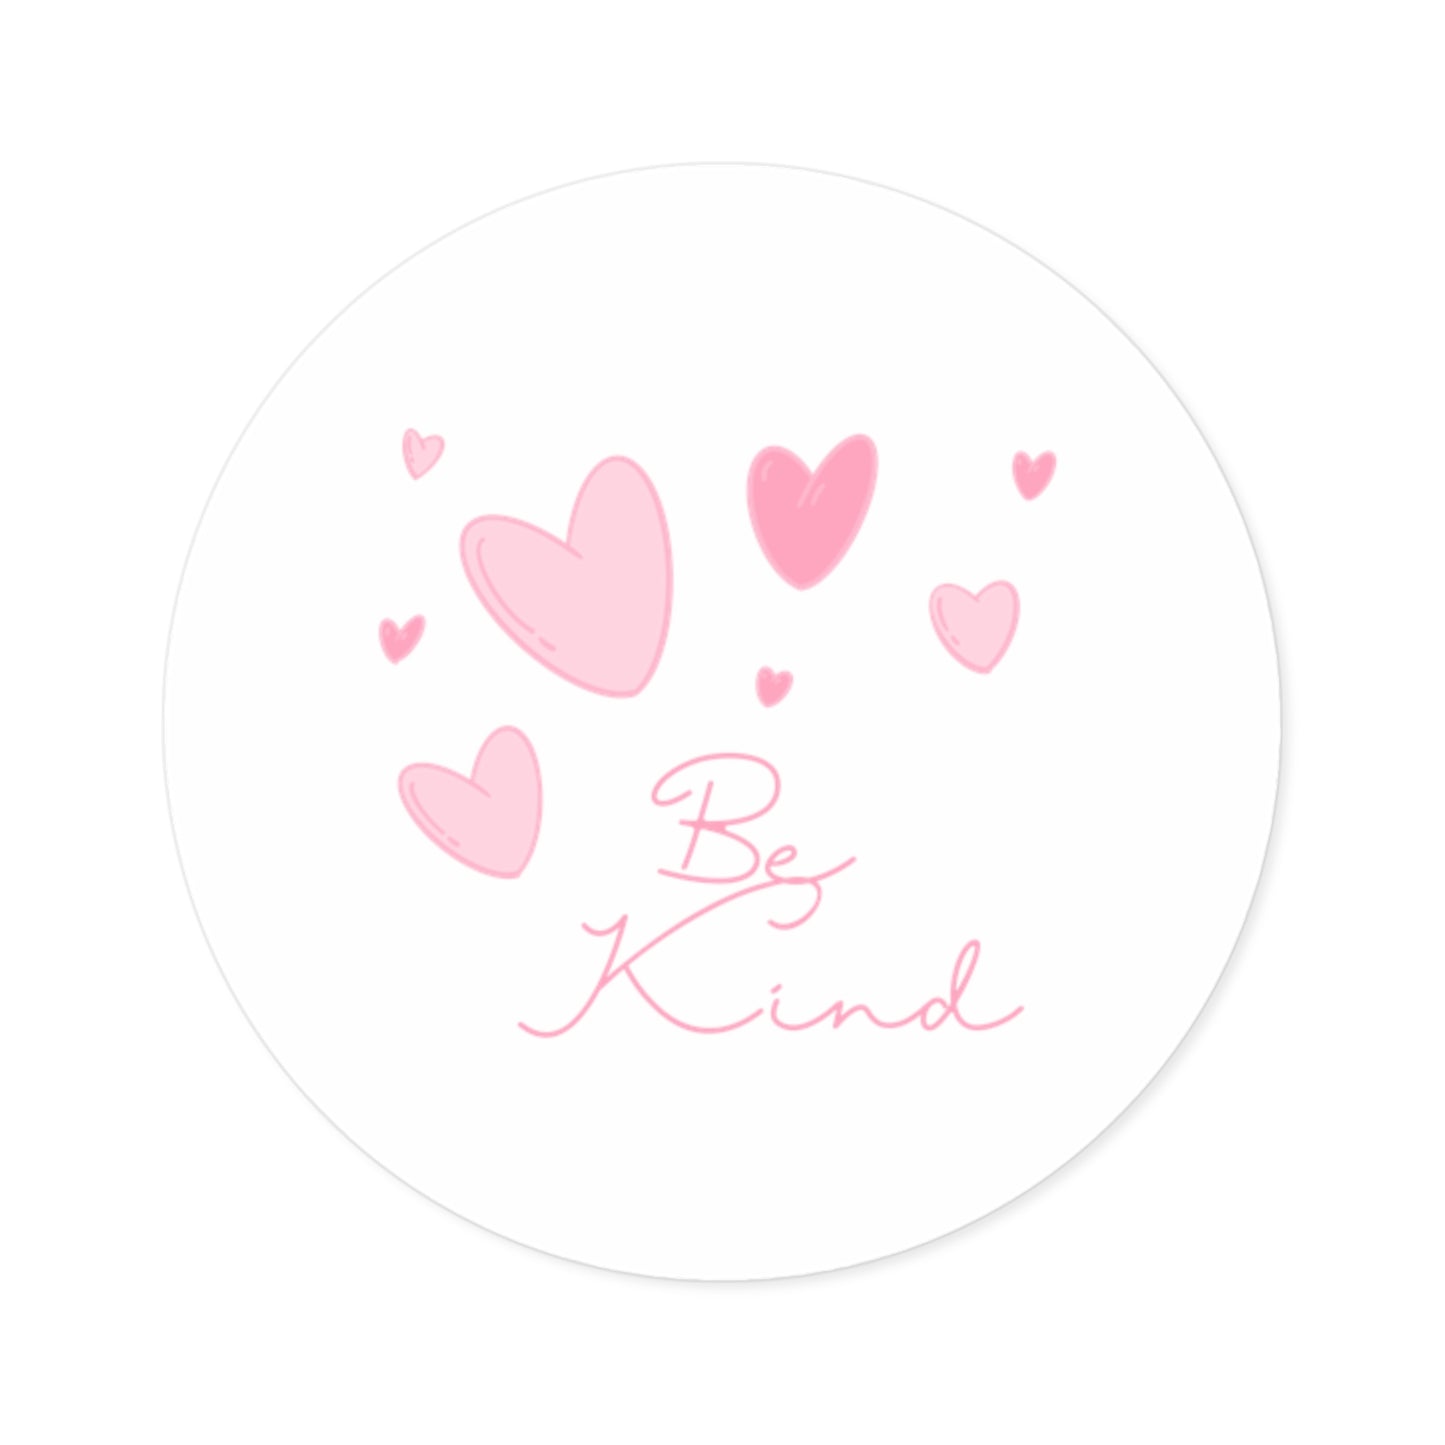 Be Kind Round Stickers For Water Bottles, Laptops, Windows